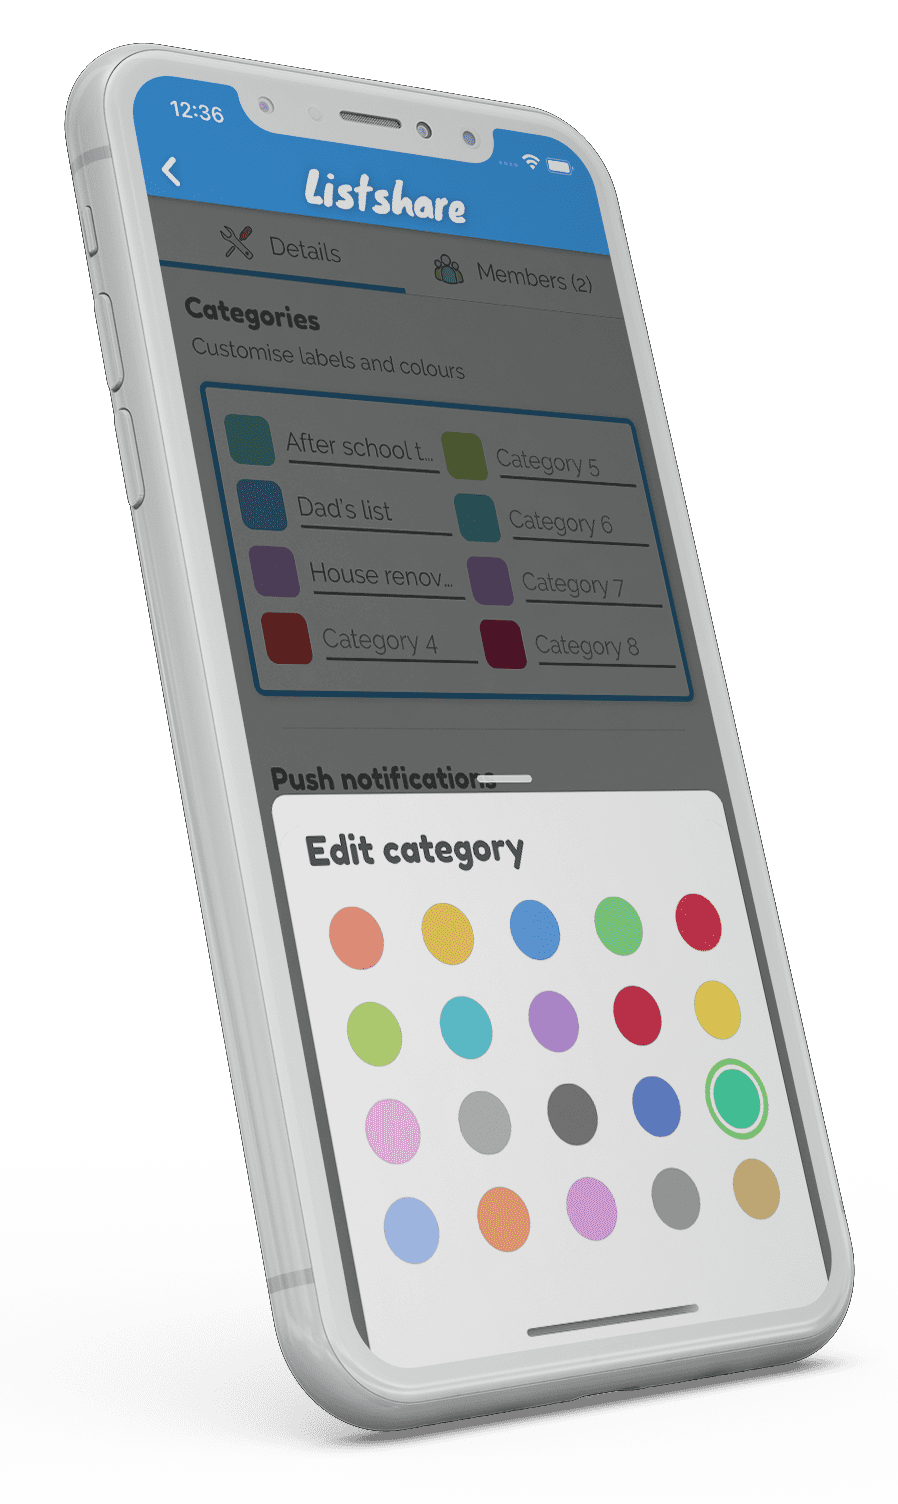 Selecting a custom colour for a category in the listshare app